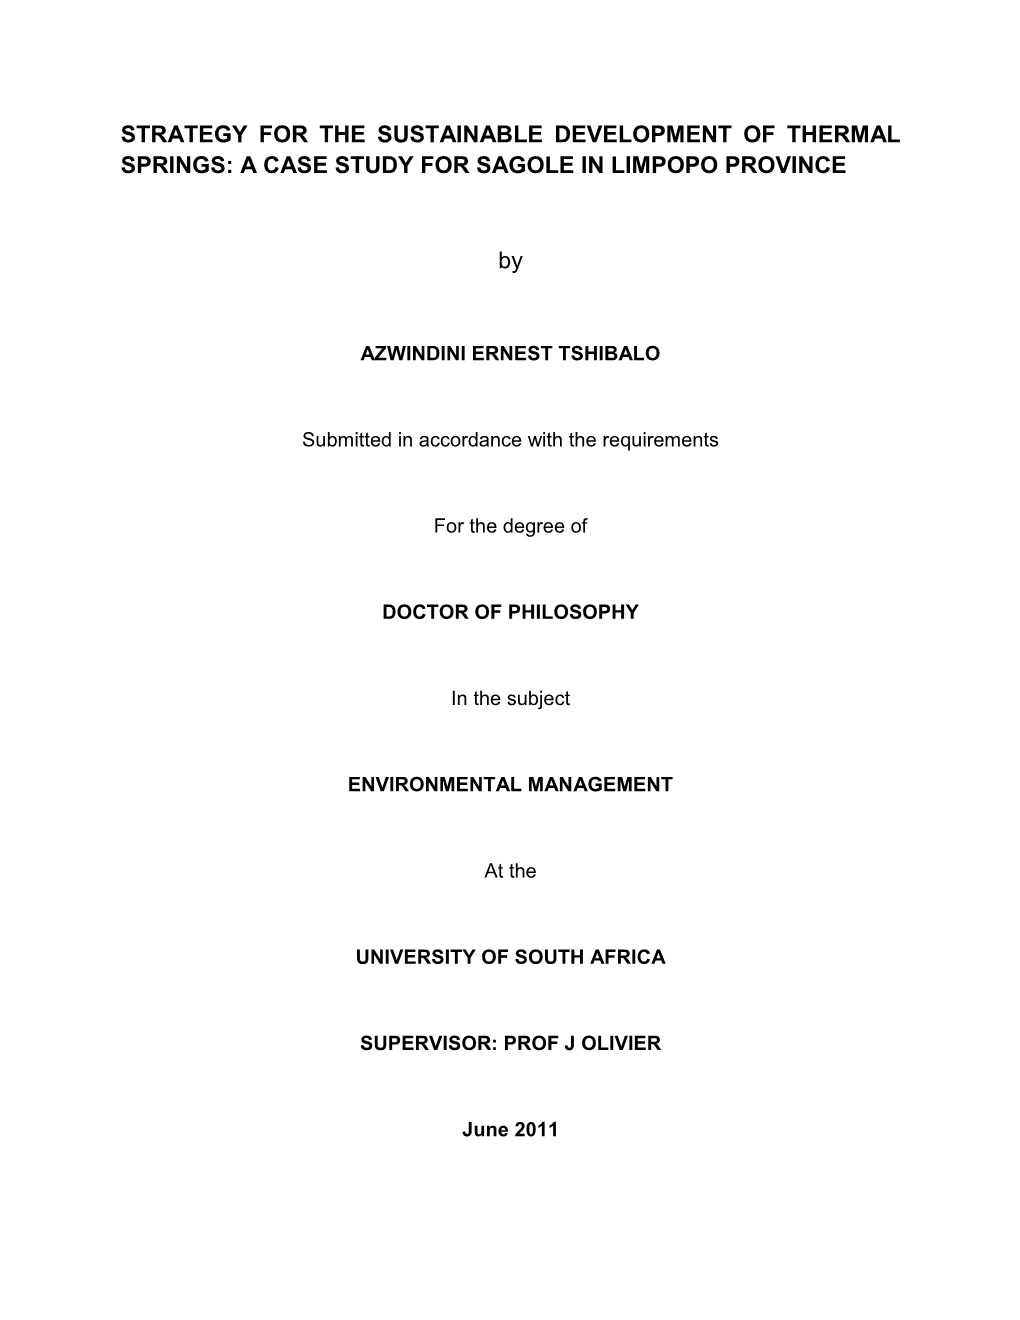 A CASE STUDY for SAGOLE in LIMPOPO PROVINCE By